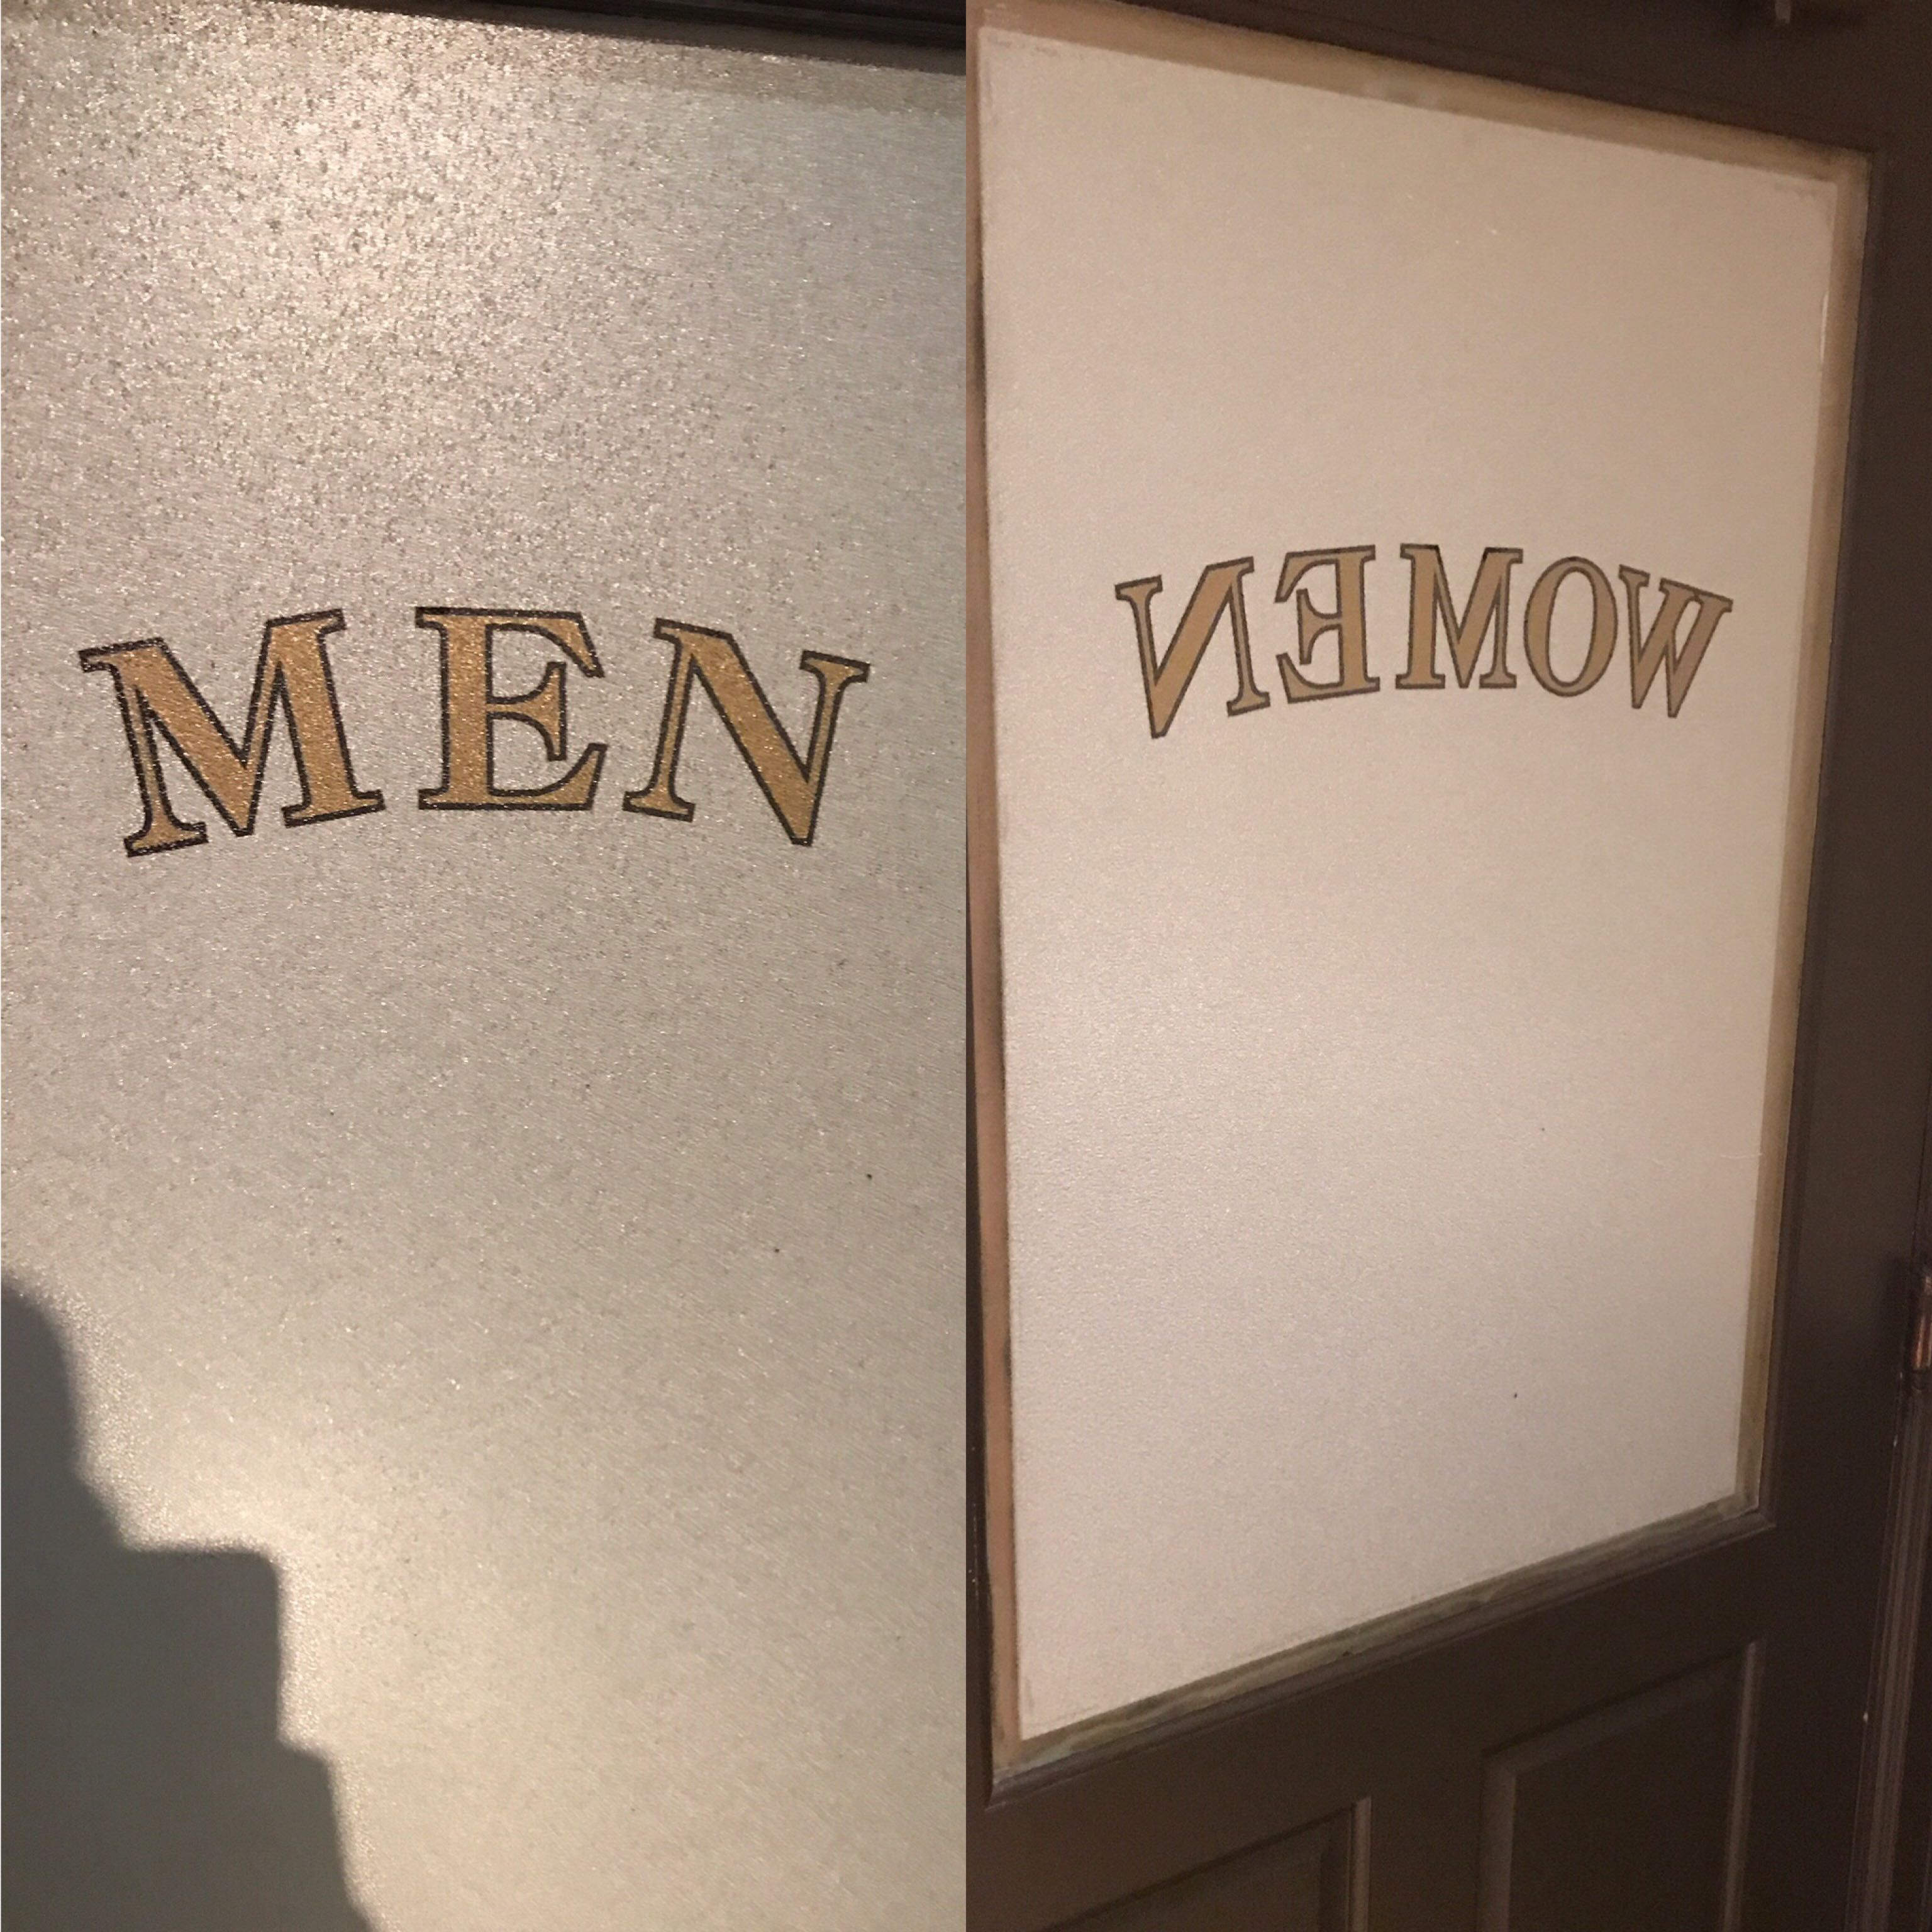 The bathroom door says "men" from the outside but from the inside says "women" spelled backwards so you think you were in the wrong bathroom